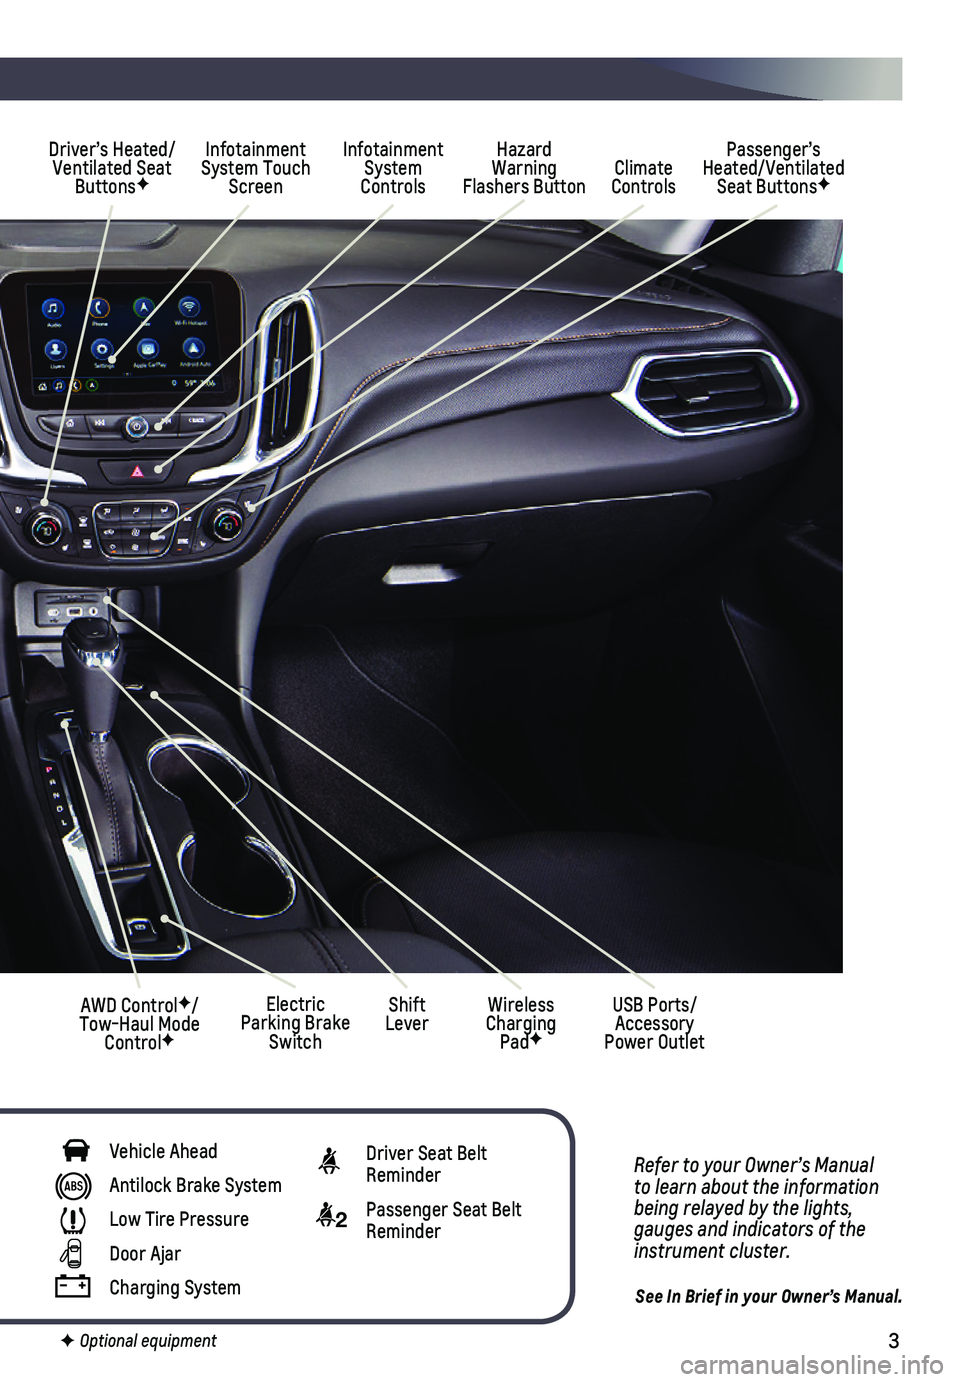 CHEVROLET EQUINOX 2019  Get To Know Guide 3
Refer to your Owner’s Manual to learn about the information being relayed by the lights, gauges and indicators of the instrument cluster.
See In Brief in your Owner’s Manual.
F Optional equipmen